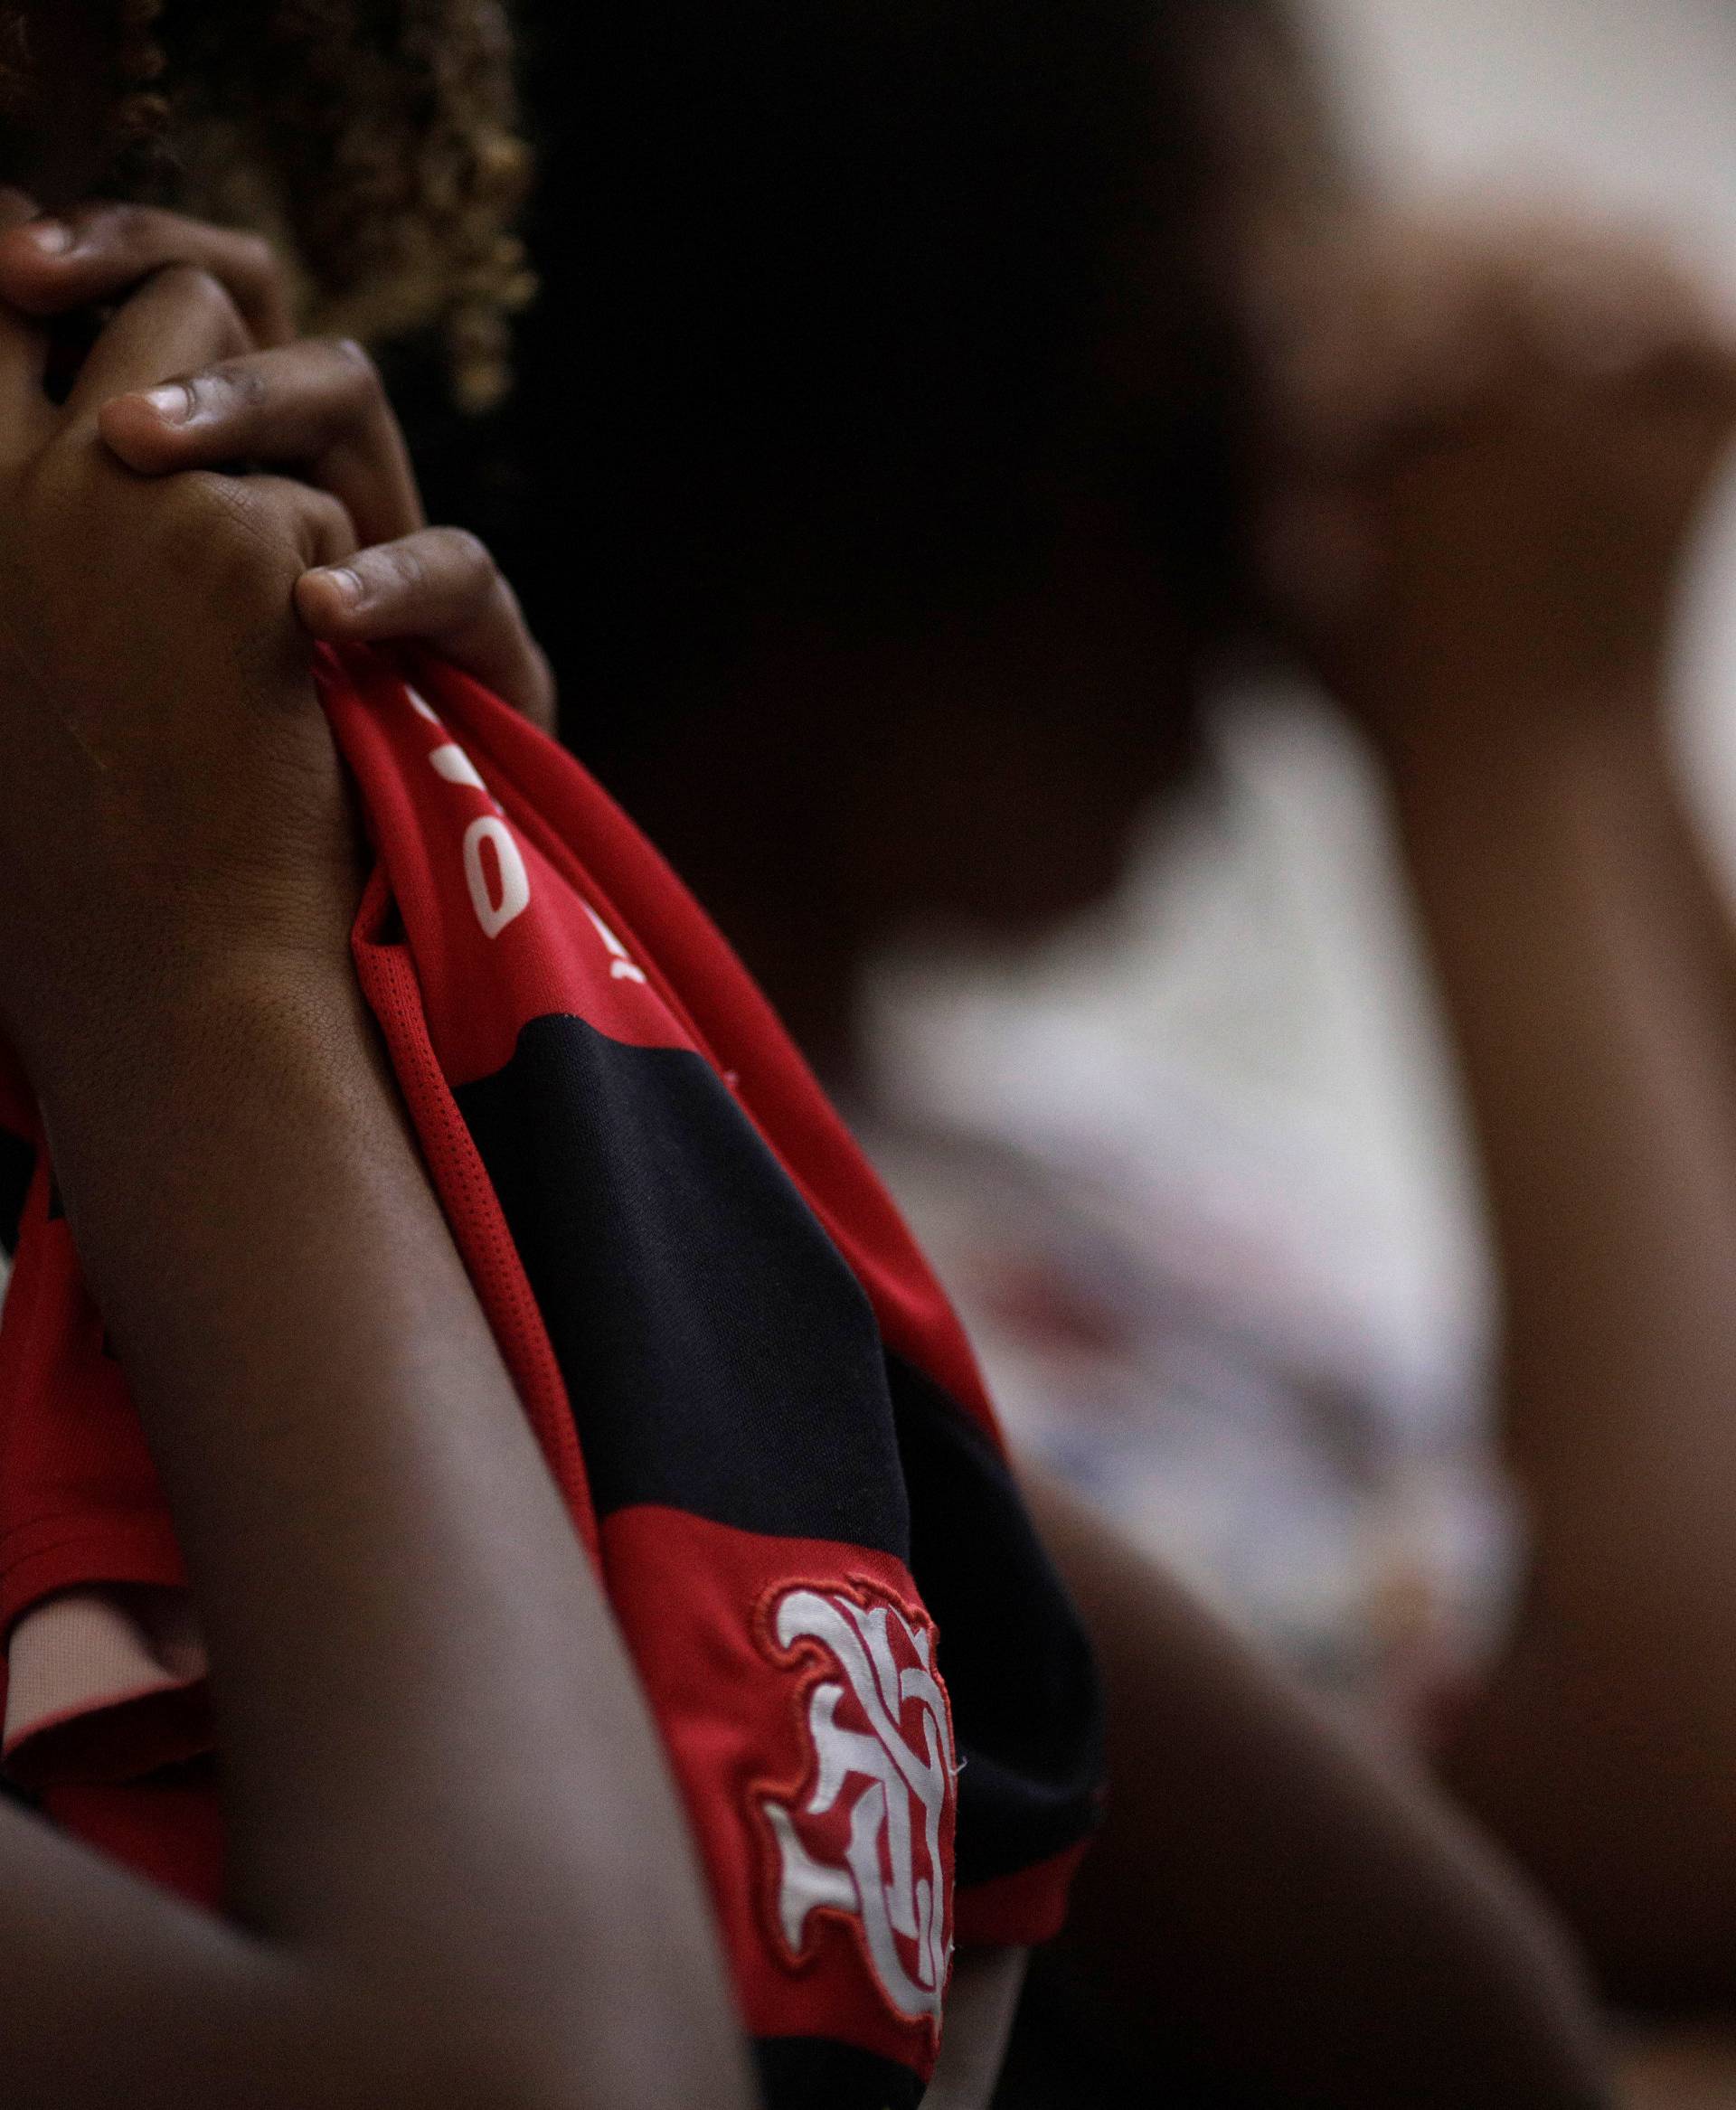 A supporter of Flamengo reacts during a mass in memory of the victims of the club's training center deadly fire in Rio de Janeiro